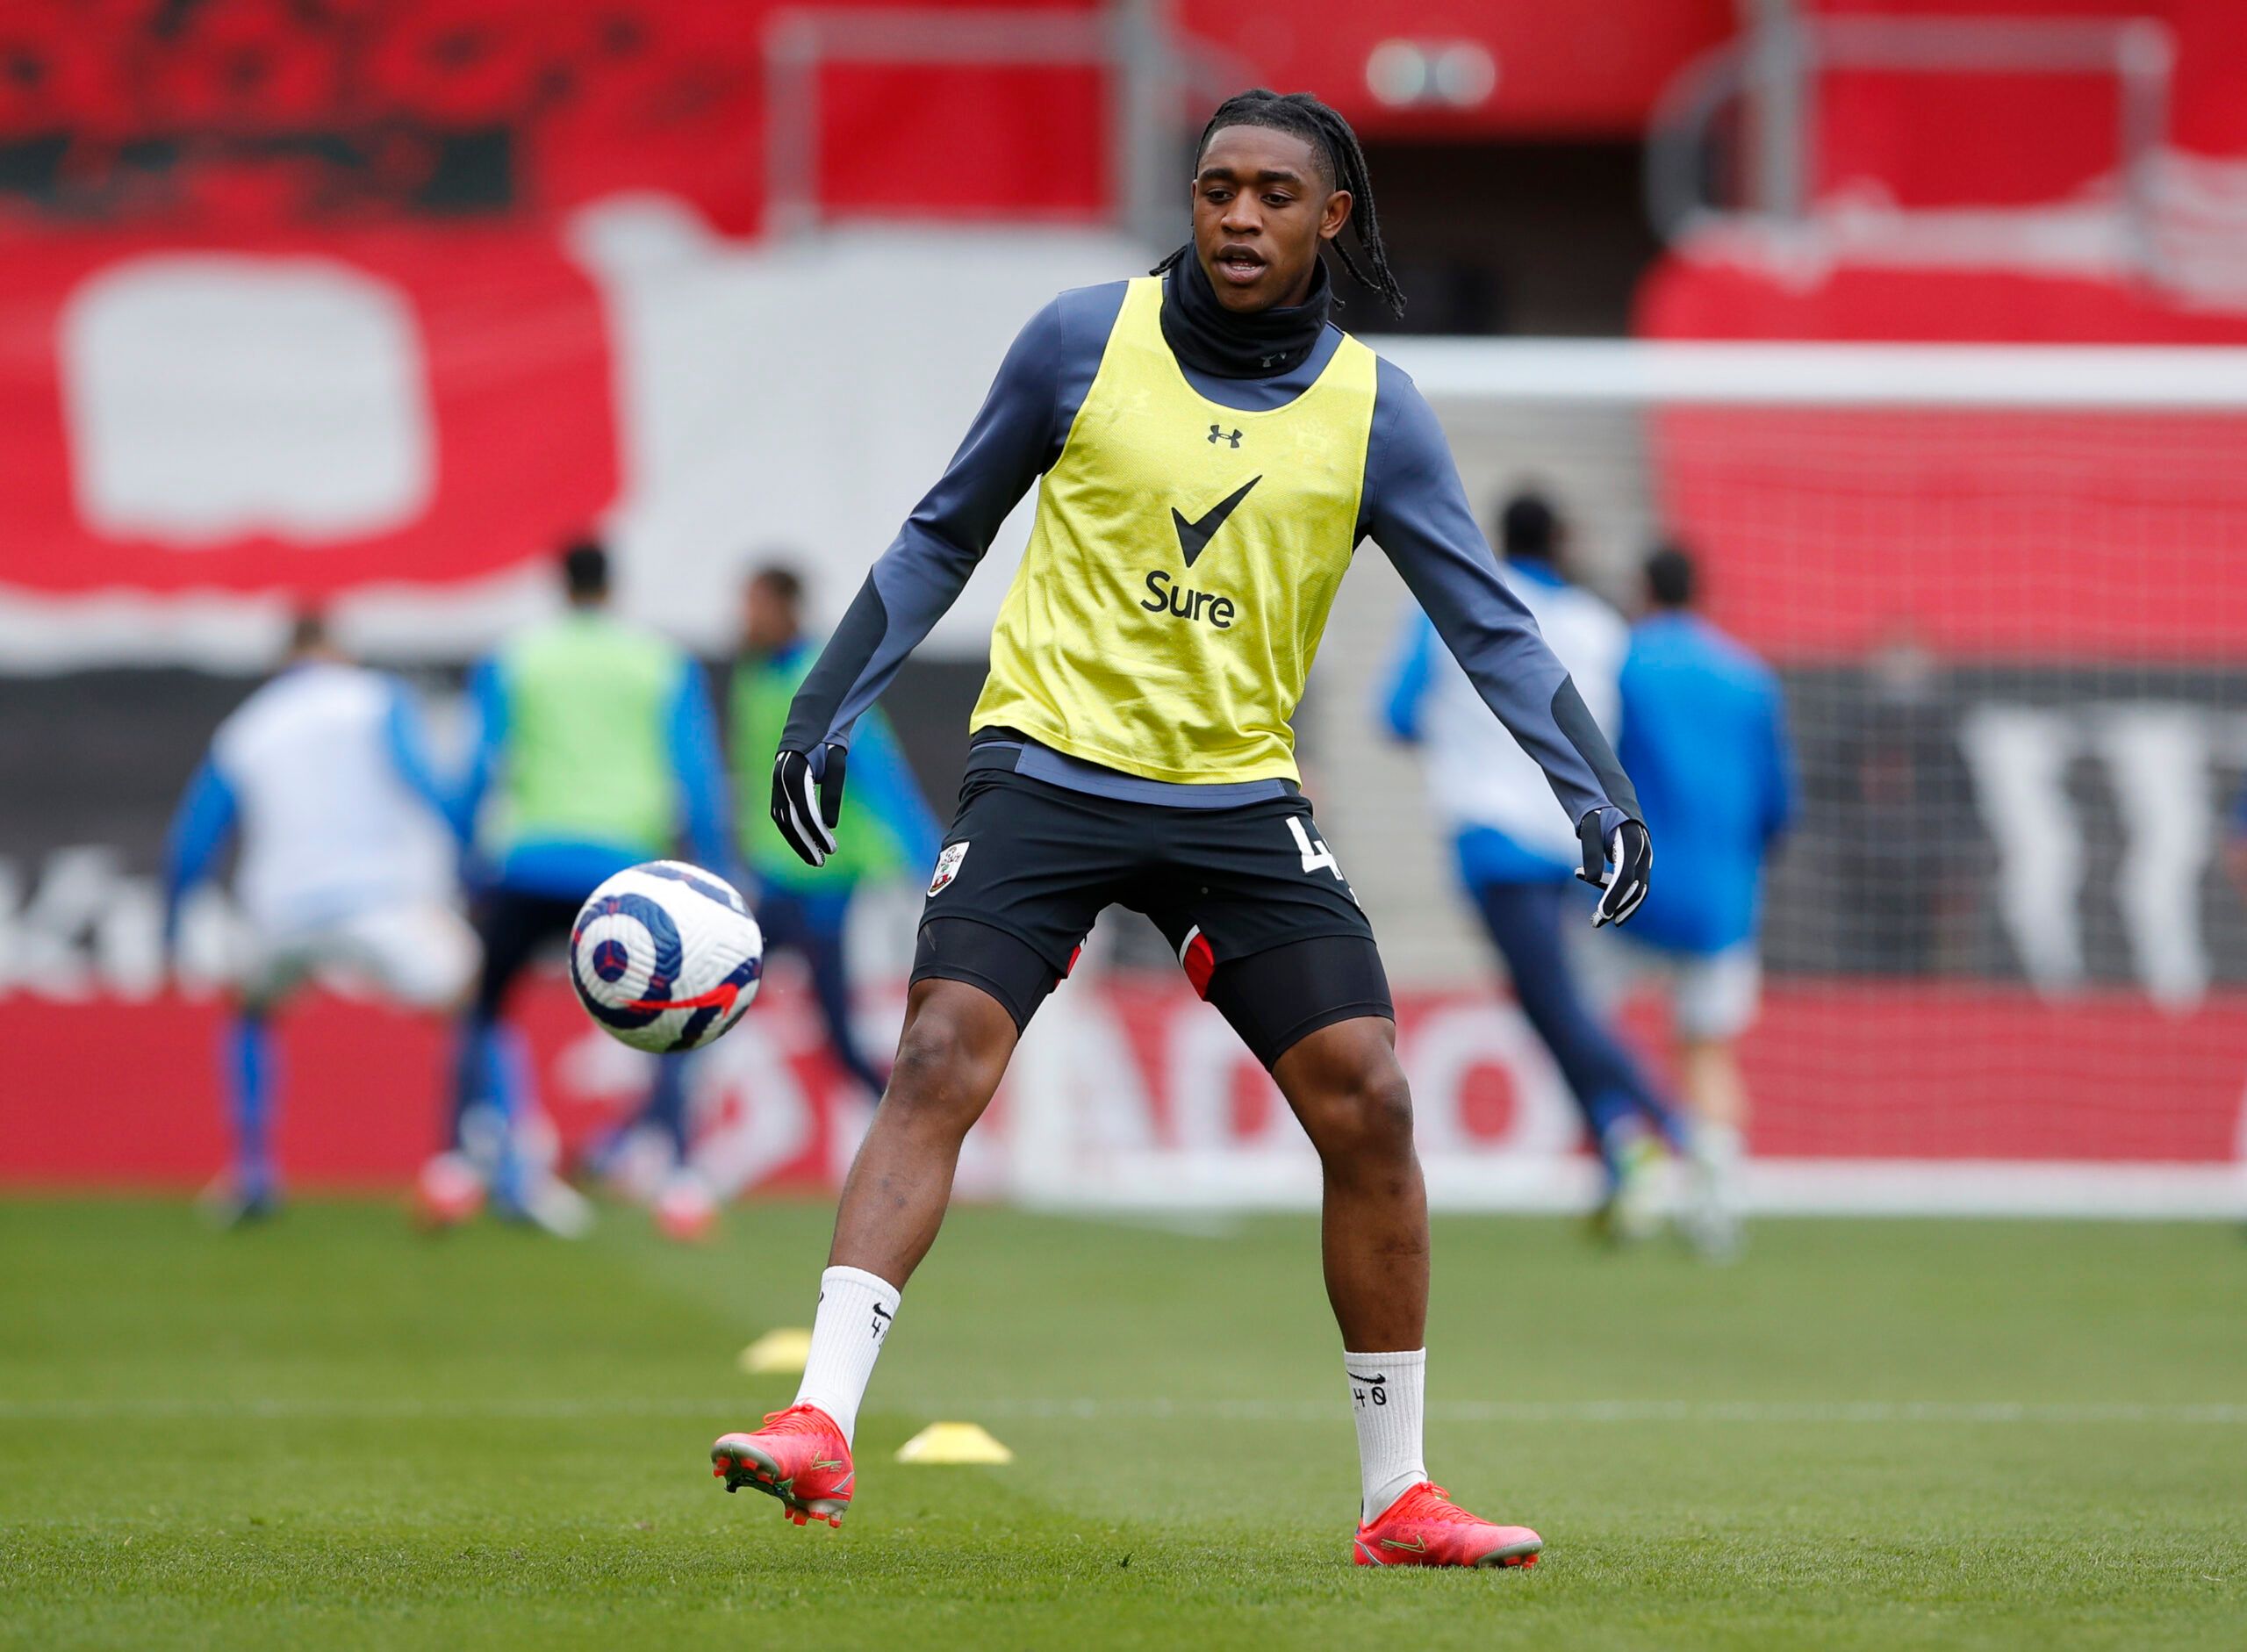 Soccer Football - Premier League - Southampton v Brighton &amp; Hove Albion - St Mary's Stadium, Southampton, Britain - March 14, 2021 Southampton's Daniel N'Lundulu during the warm up before the match Pool via REUTERS/Andrew Couldridge EDITORIAL USE ONLY. No use with unauthorized audio, video, data, fixture lists, club/league logos or 'live' services. Online in-match use limited to 75 images, no video emulation. No use in betting, games or single club /league/player publications.  Please contac